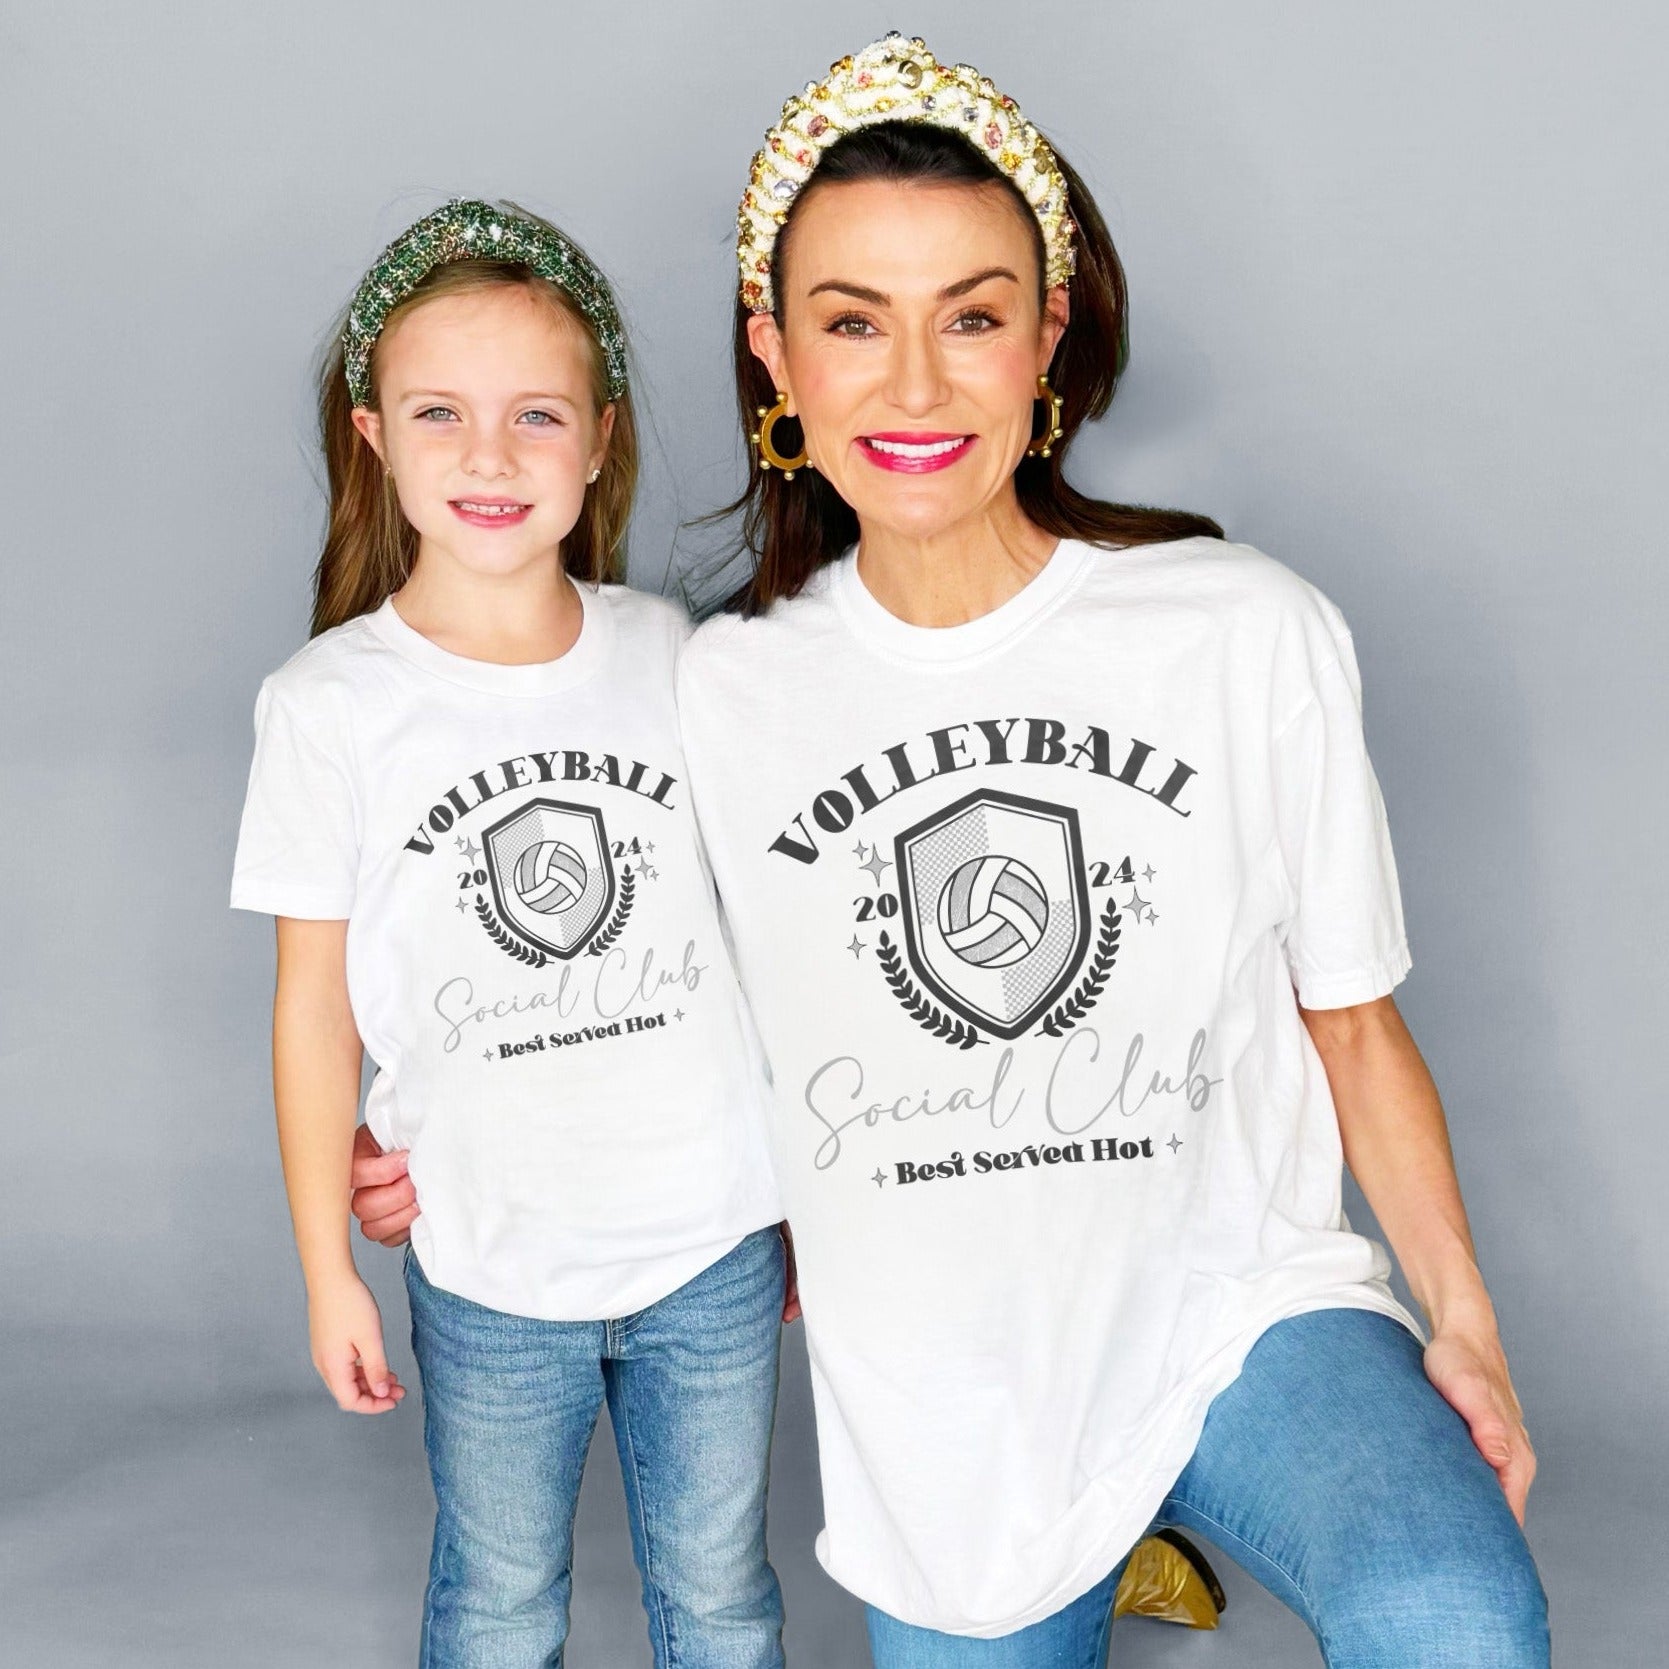 Volleyball Social Club Youth and Adult Tee